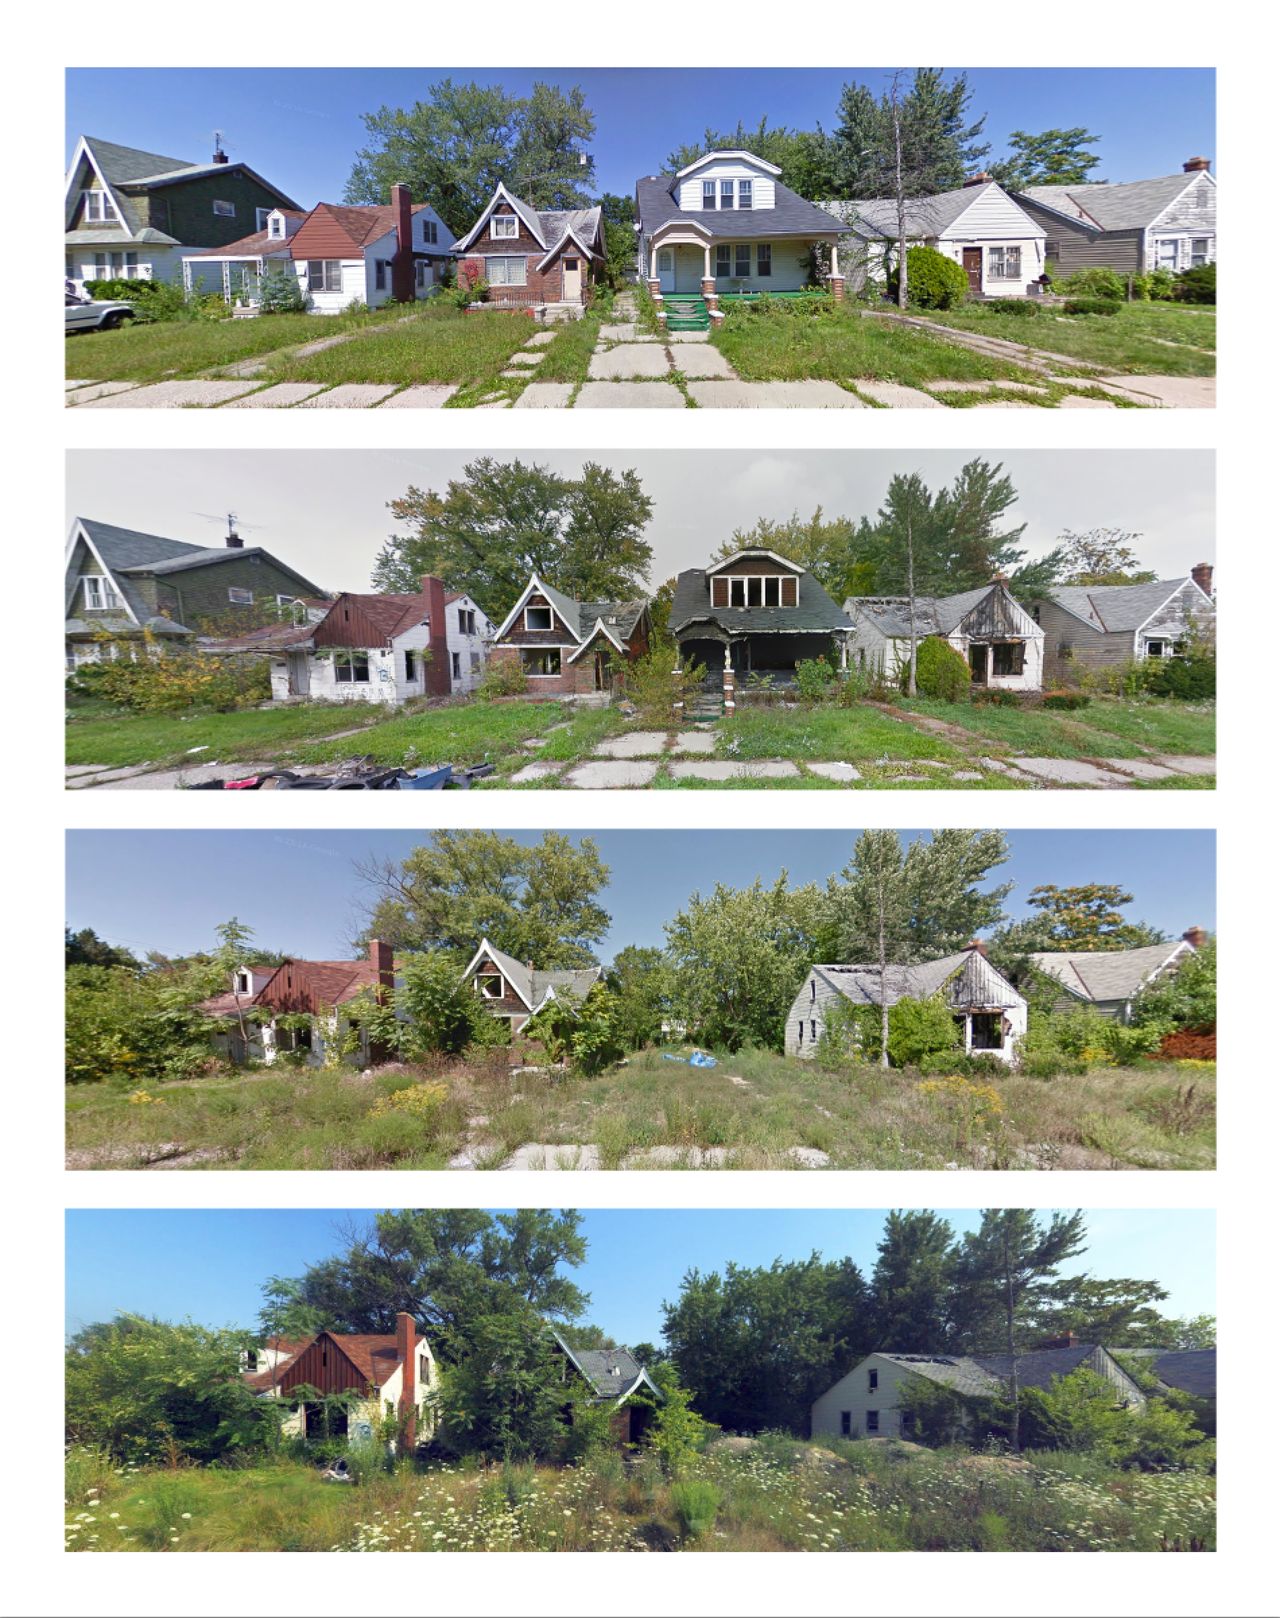 Only one person lived on this block of Hazelridge Street in 2014. The block is shown in September 2009, October 2011, September 2013 and August 2014 images from Google and Bing.